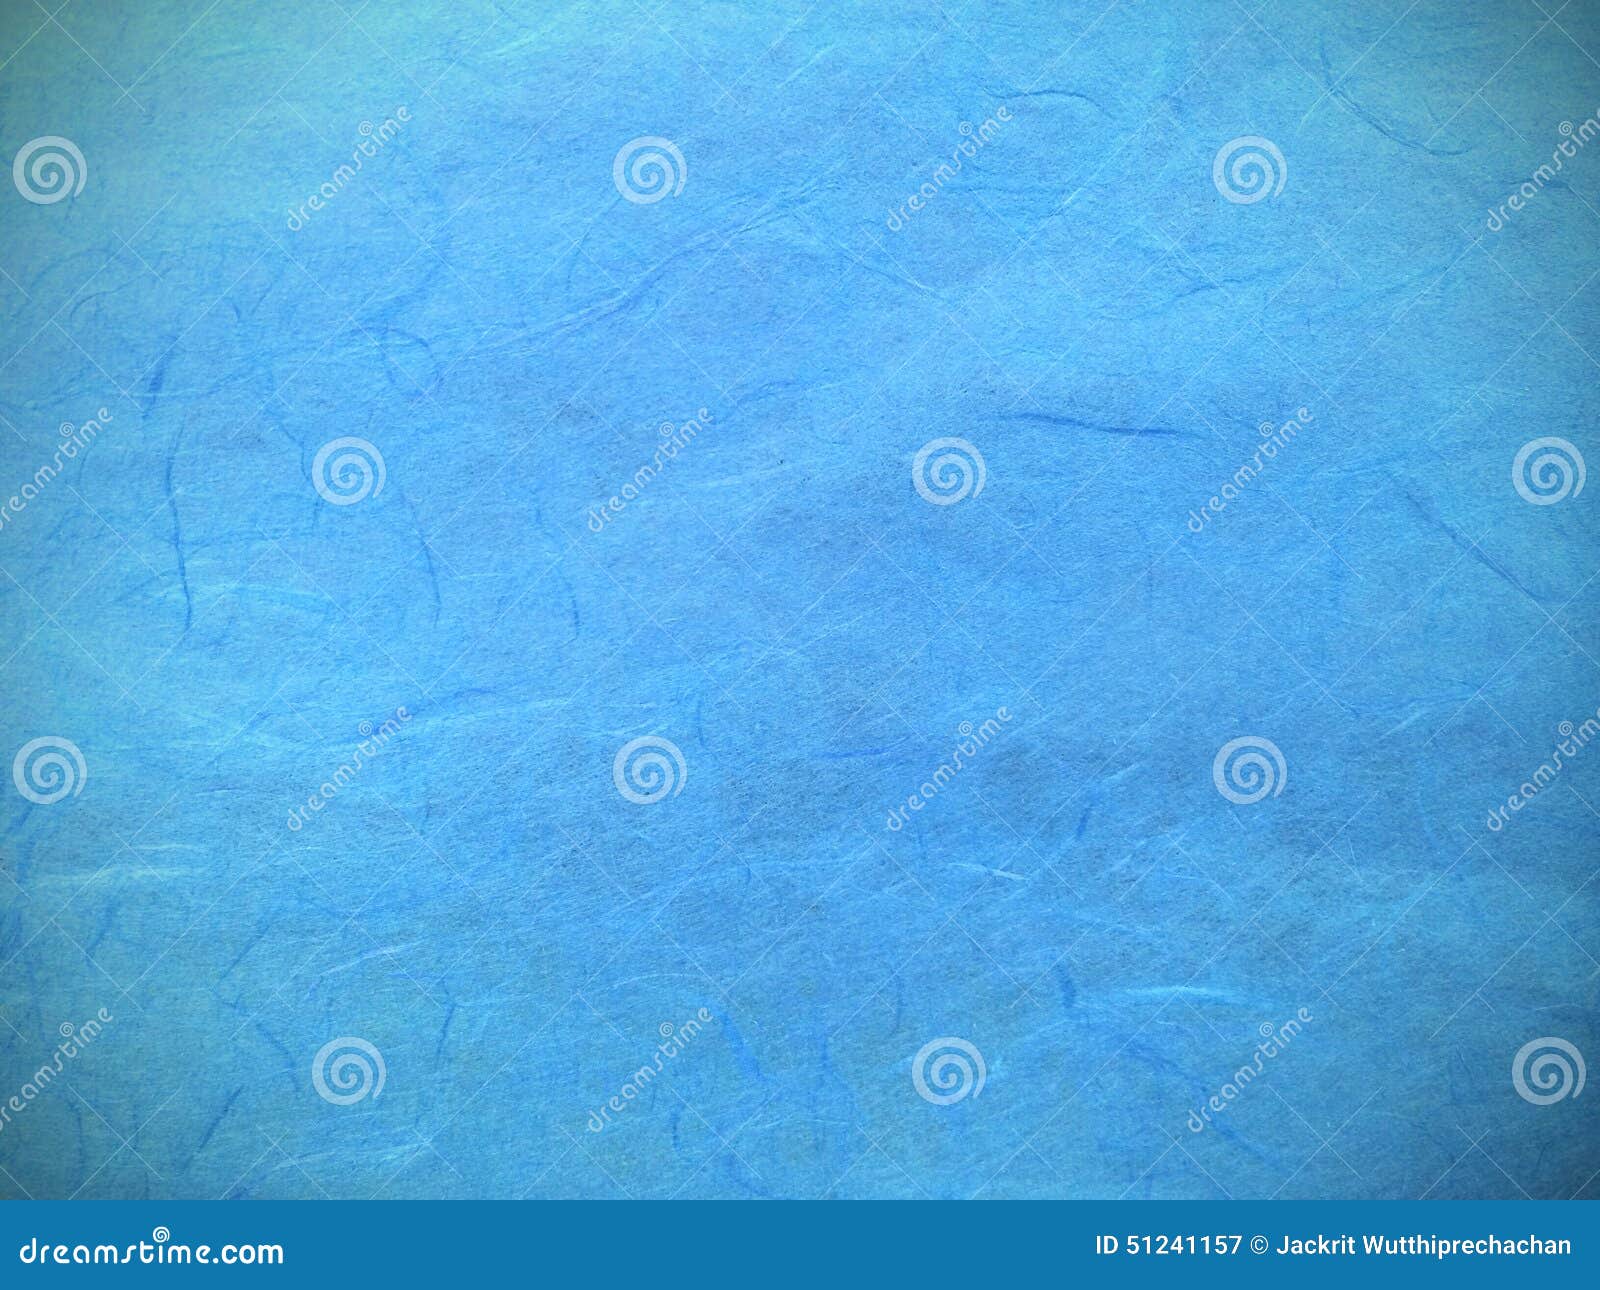 vignette classic blue mulberry paper abstract pattern used as template background texture